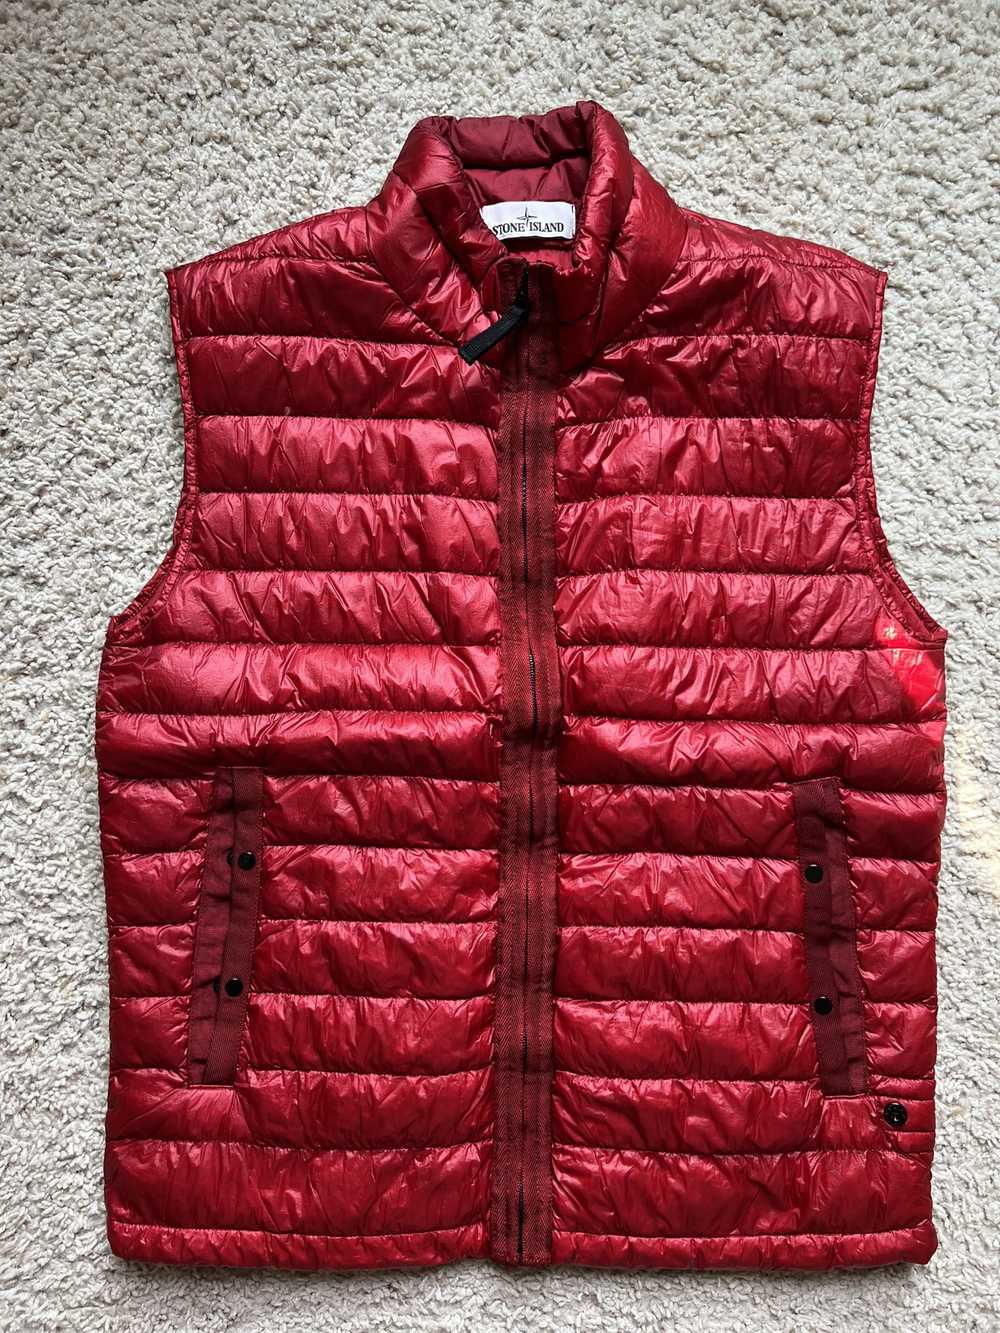 Stone Island Garment Dyed Down Vest size L Red - image 1